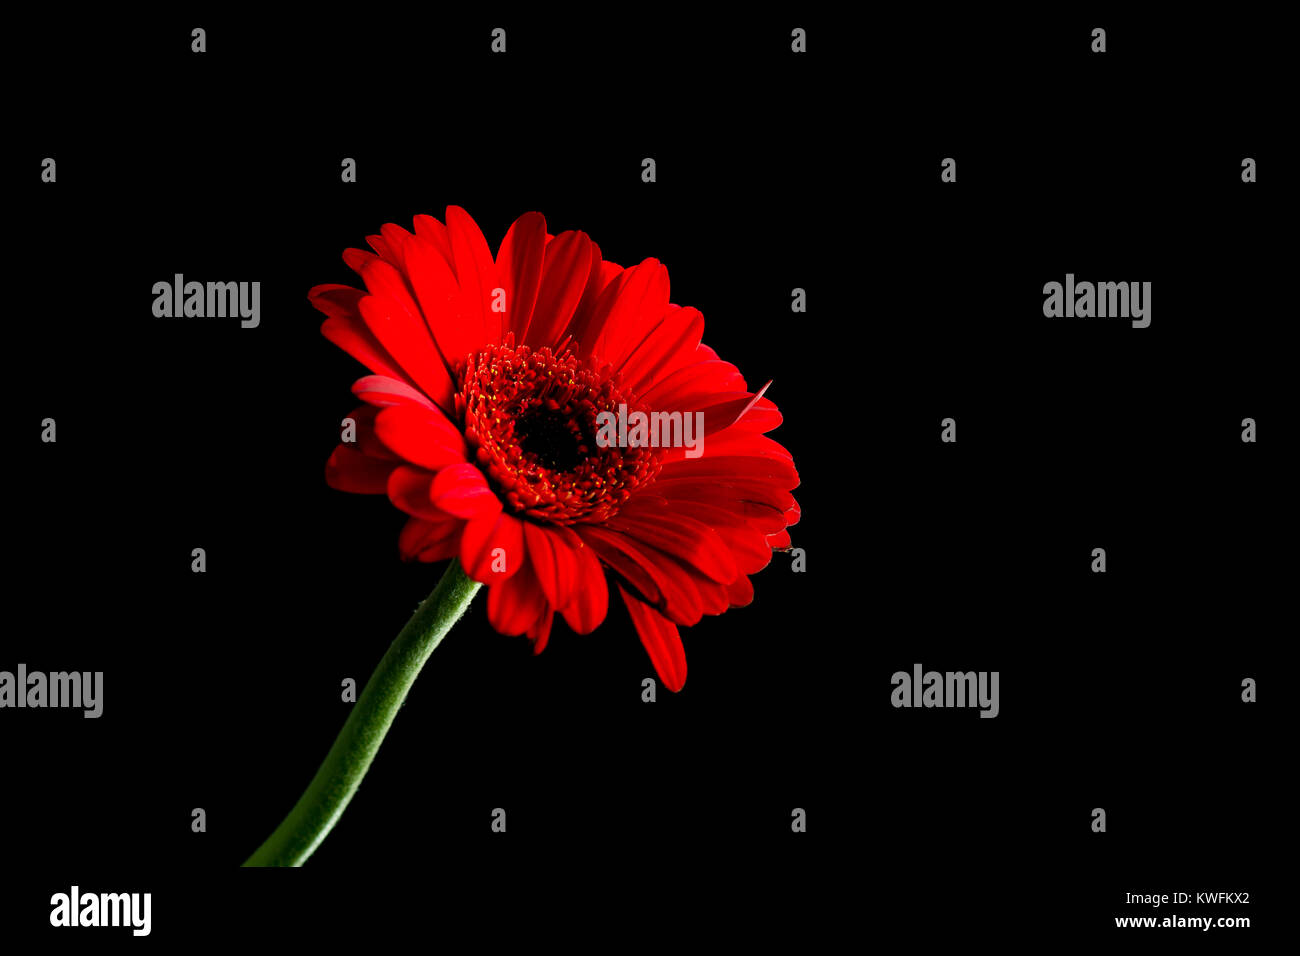 A red flower on a black background Stock Photo